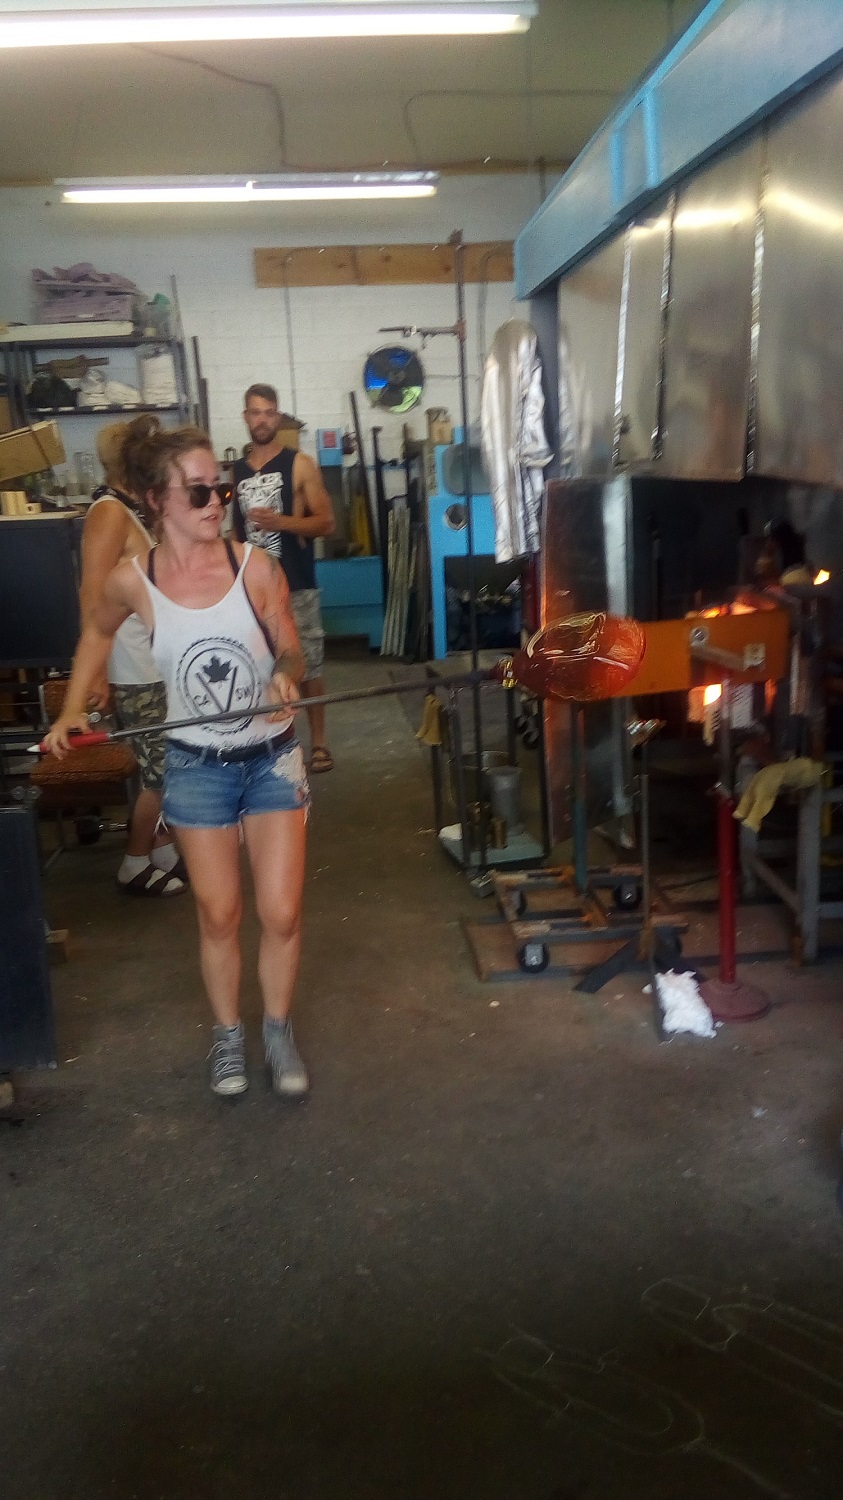 Working in a glass blowing studio.